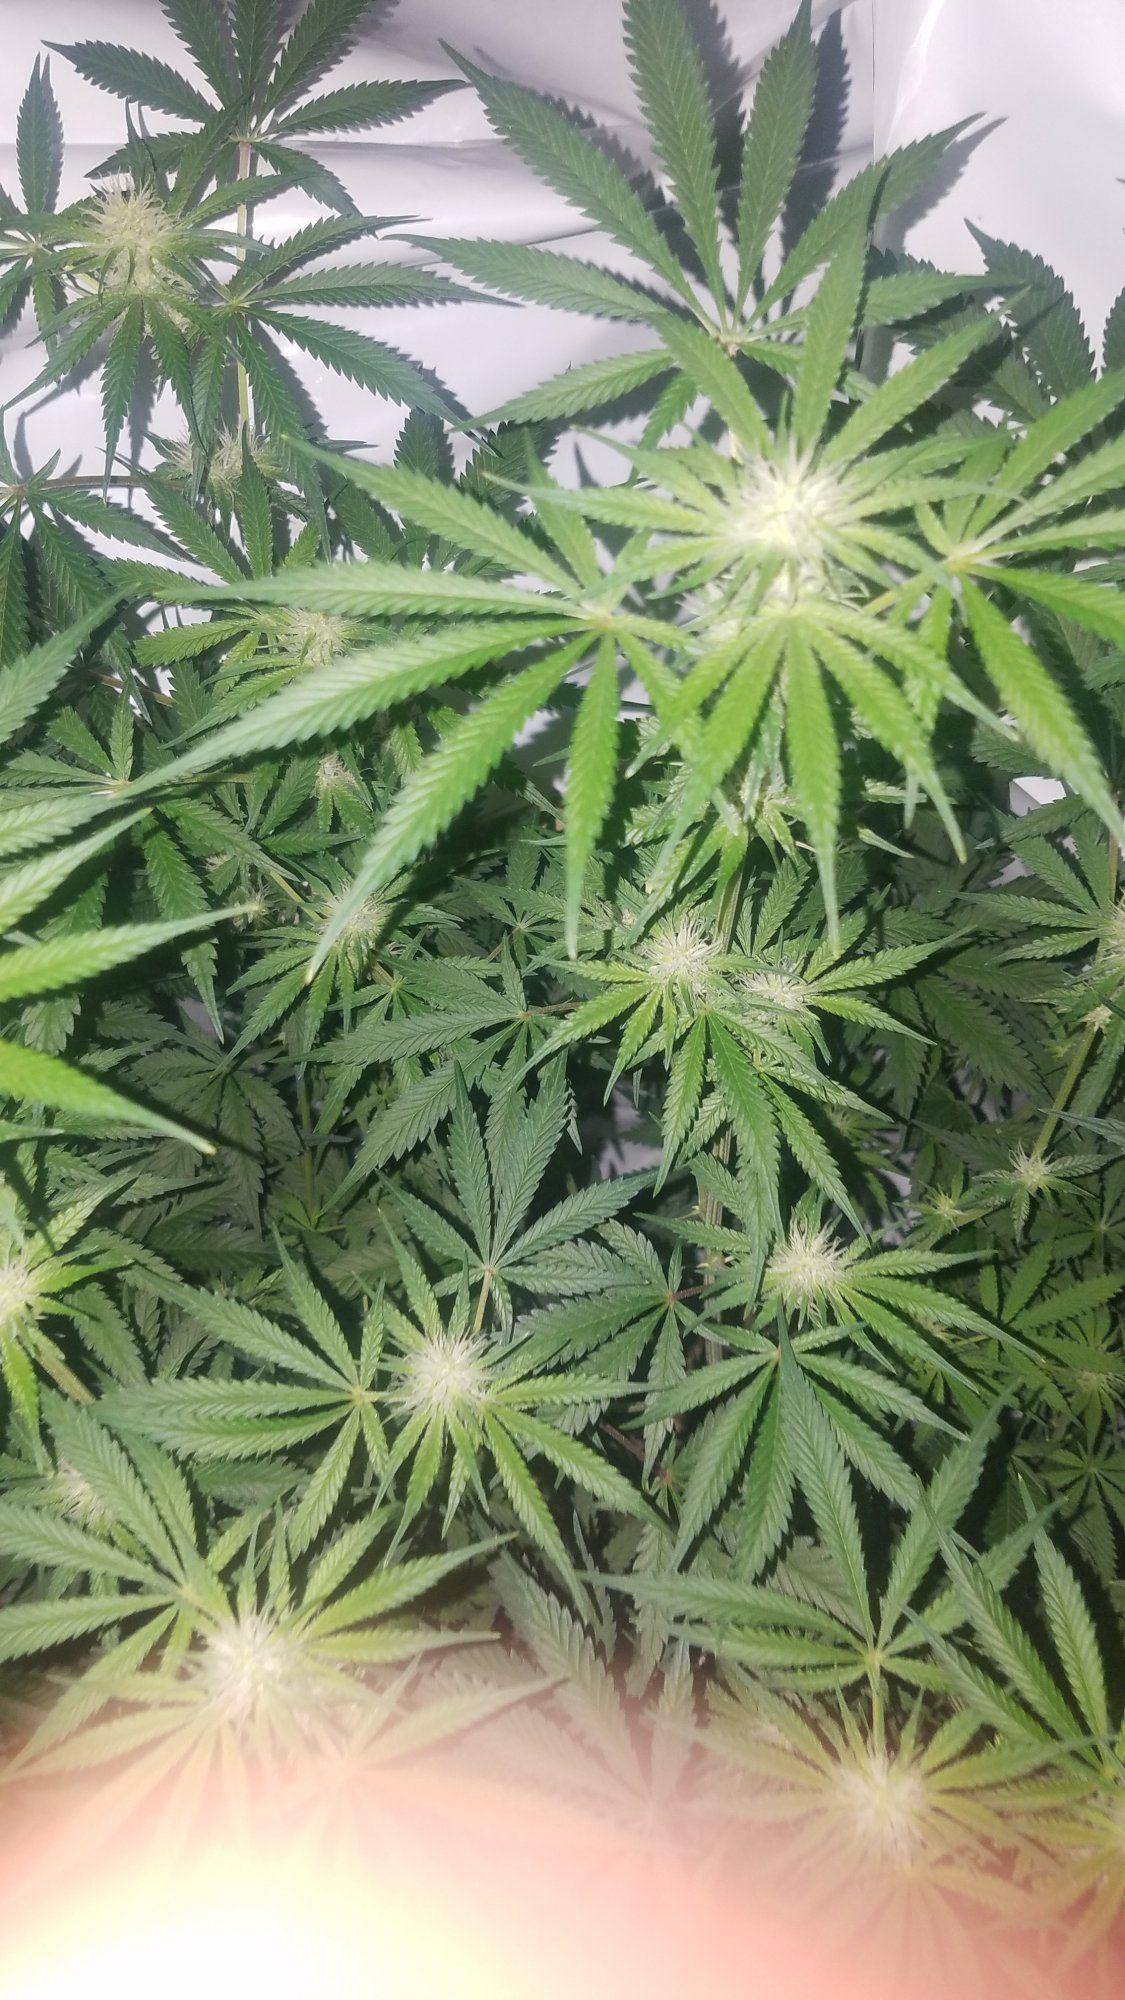 Brand new grower lack or burn 4